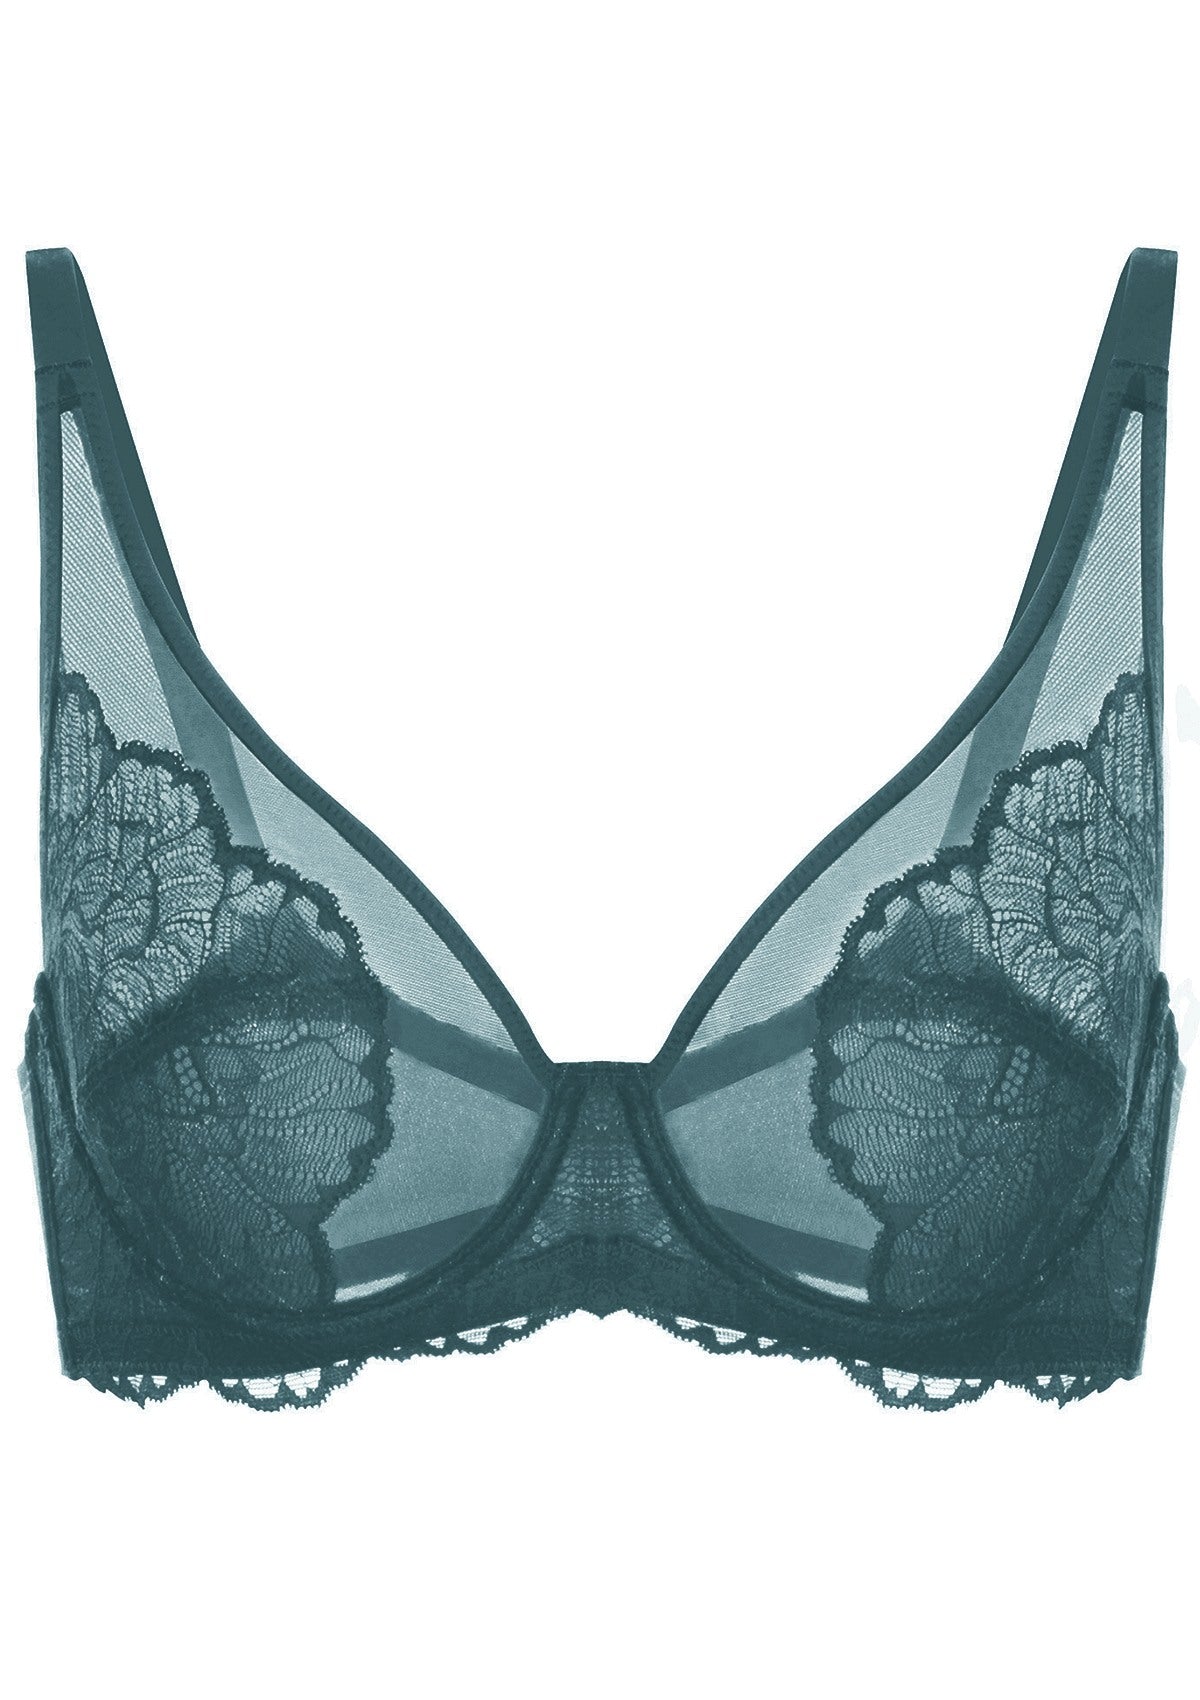 HSIA Blossom Full Figure See-Through Lace Bra For Side And Back Fat - Biscay Blue / 36 / DD/E